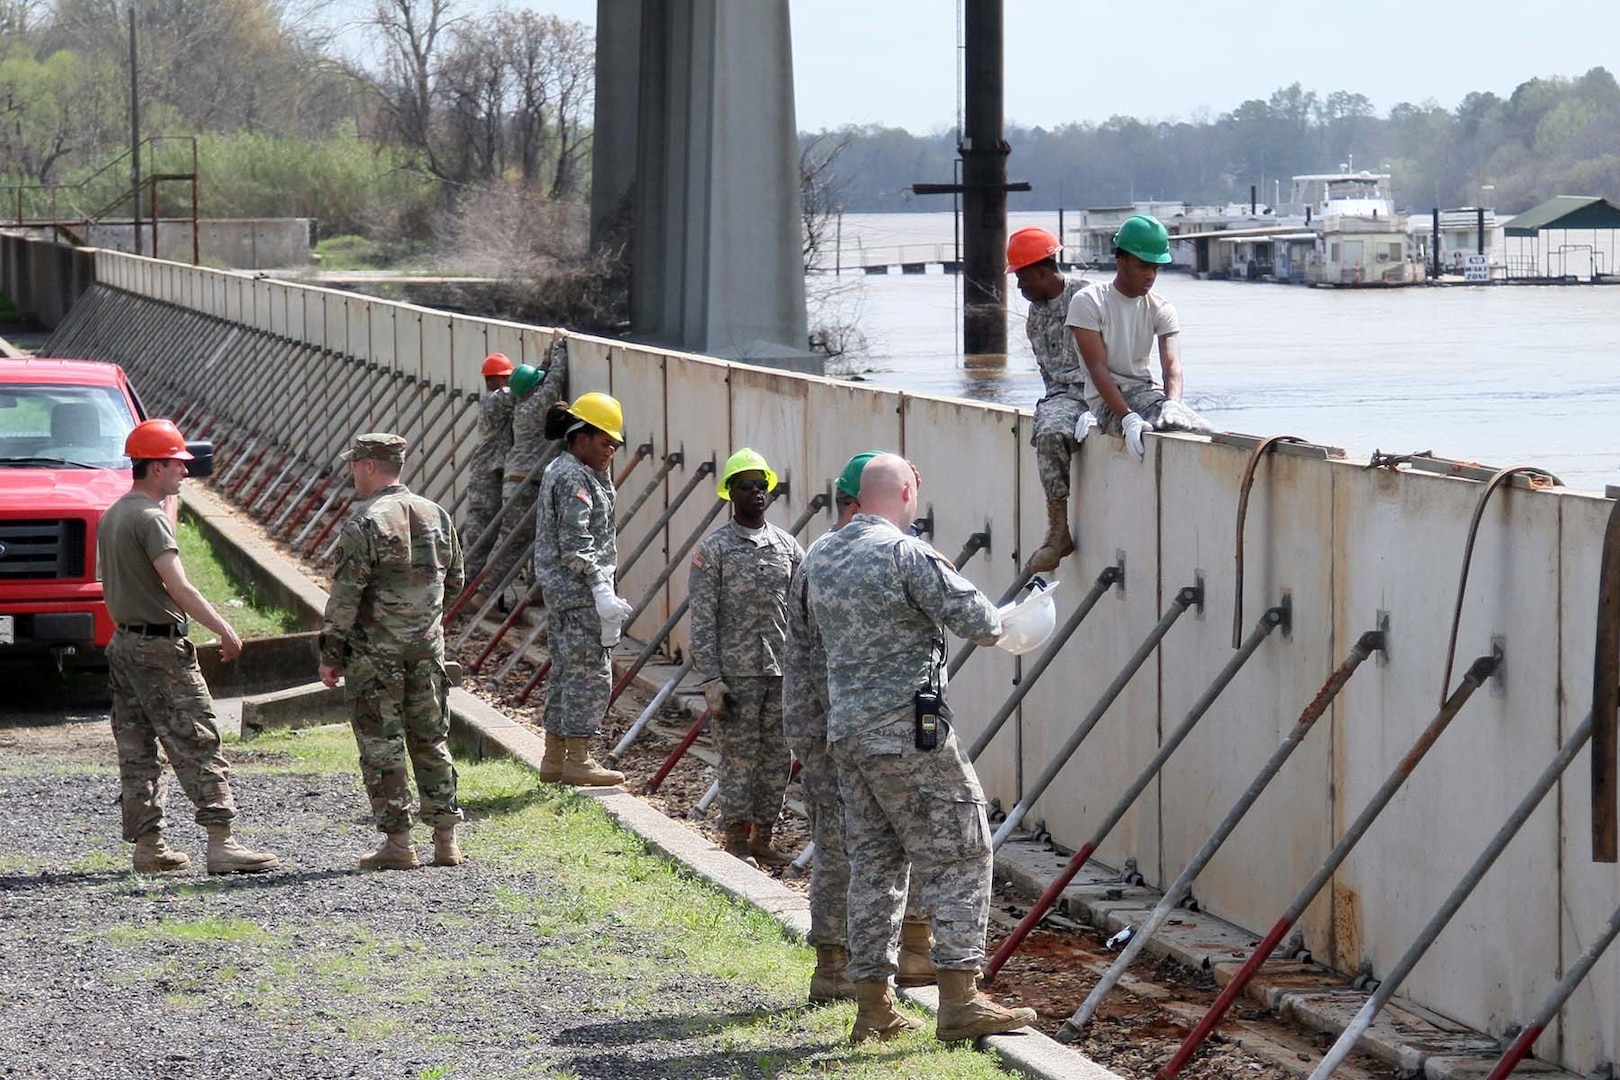 More than 15 Louisiana National Guard members from the 1022nd Engineer Company and the 844th Engineer Company out of West Monroe are assembling emergency levee walls on the banks of the Ouachita River in Monroe on March 13, 2016, to protect the city from rising river levels caused by excessive rainfall. The Soldiers are working in conjunction with the Tensas Levee Basin District to transform half a mile of hinged concrete slabs, which are usually the sidewalk alongside the river, into a six-foot tall levee. 